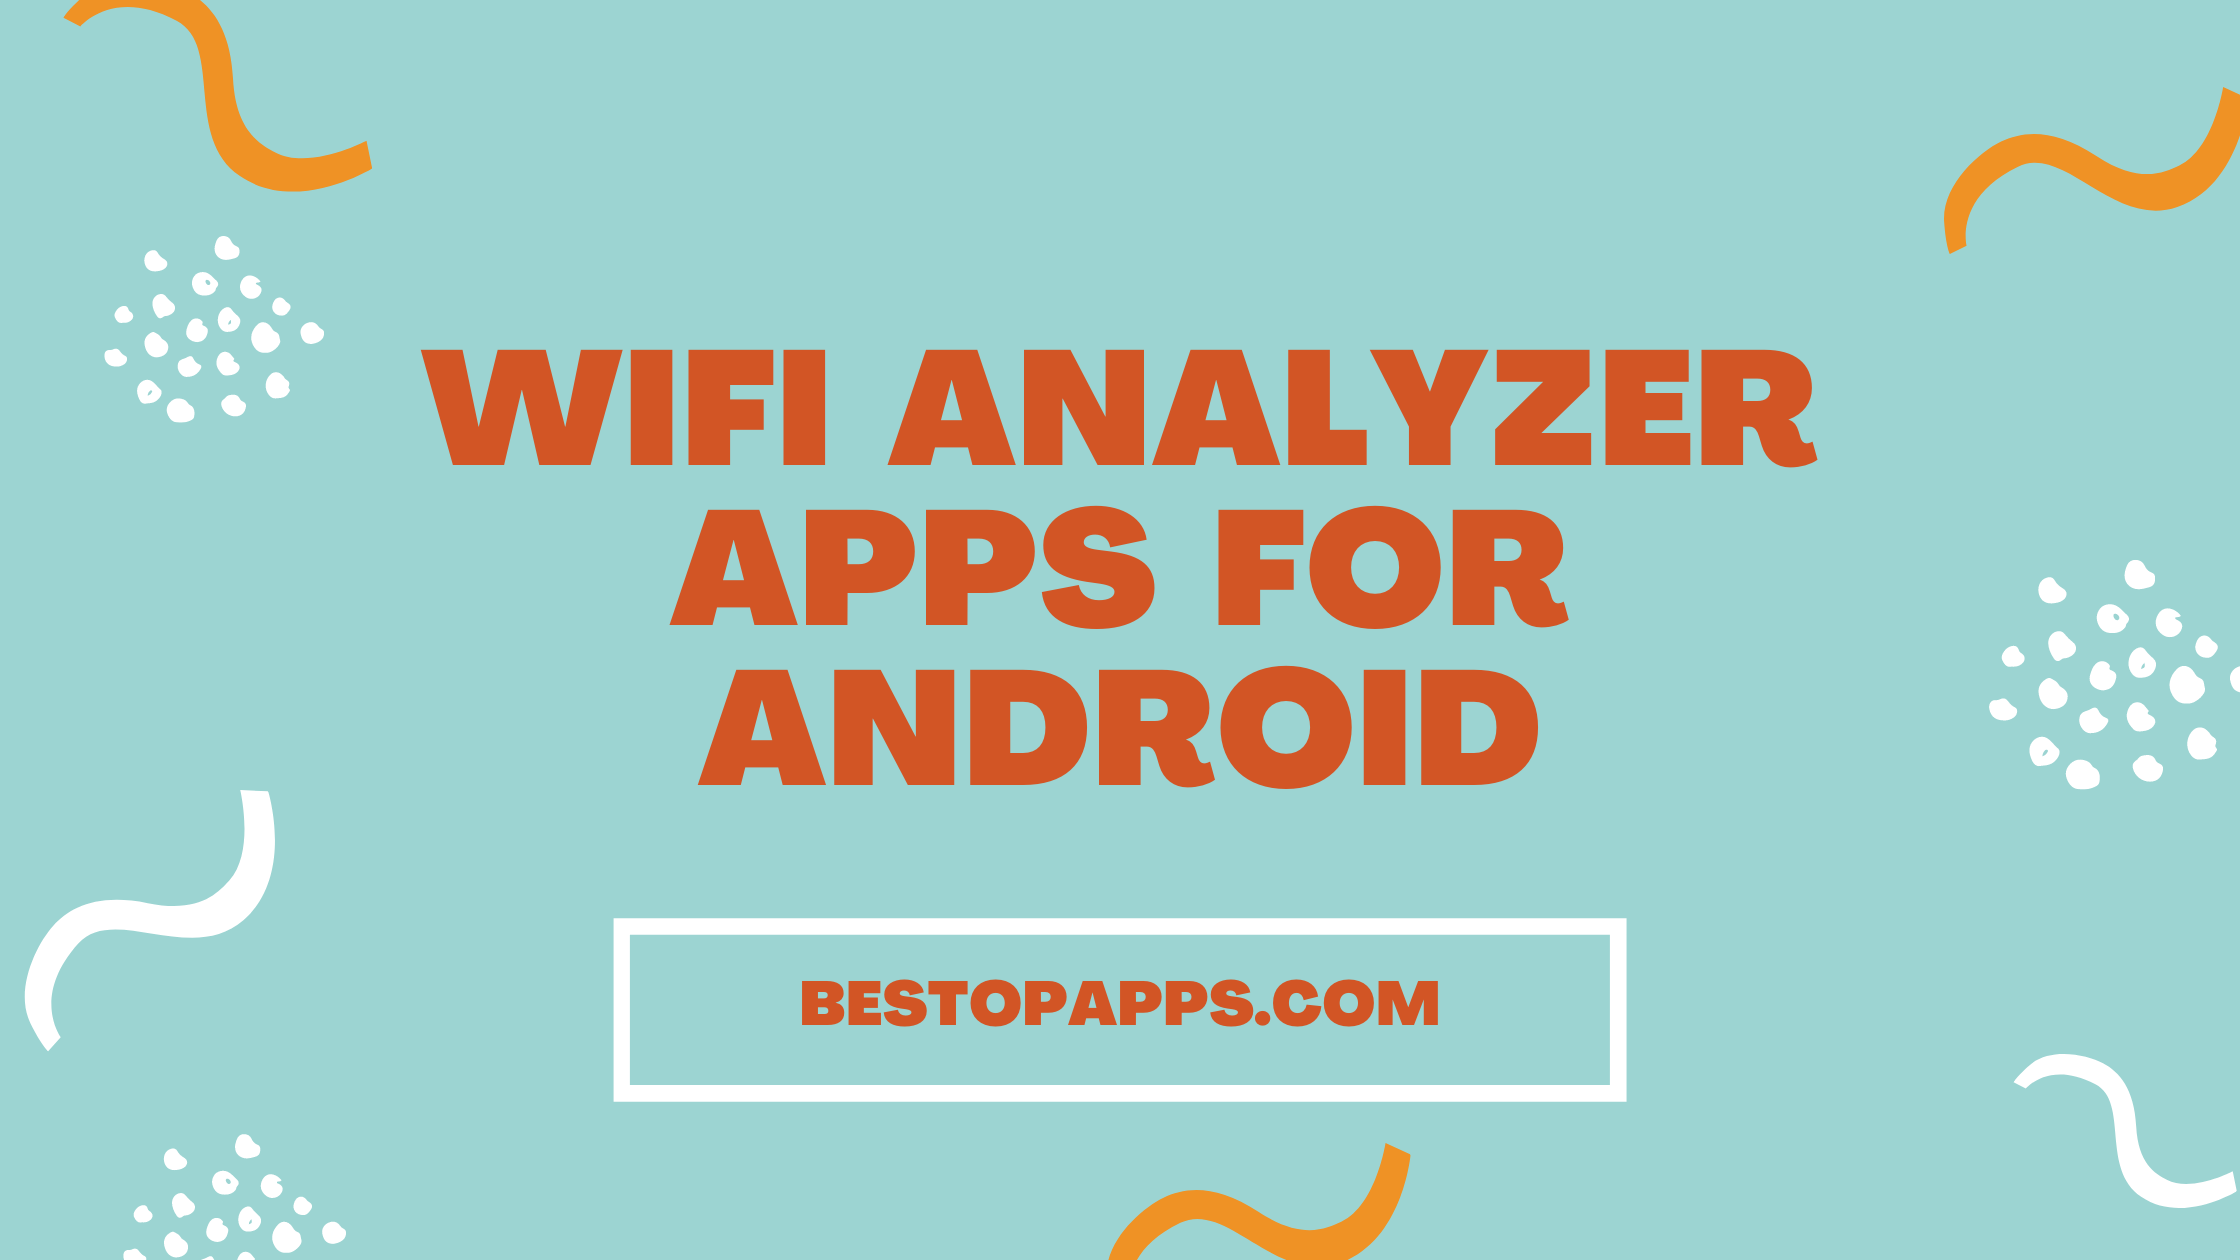 WIFI ANALYZER APPS FOR ANDROID